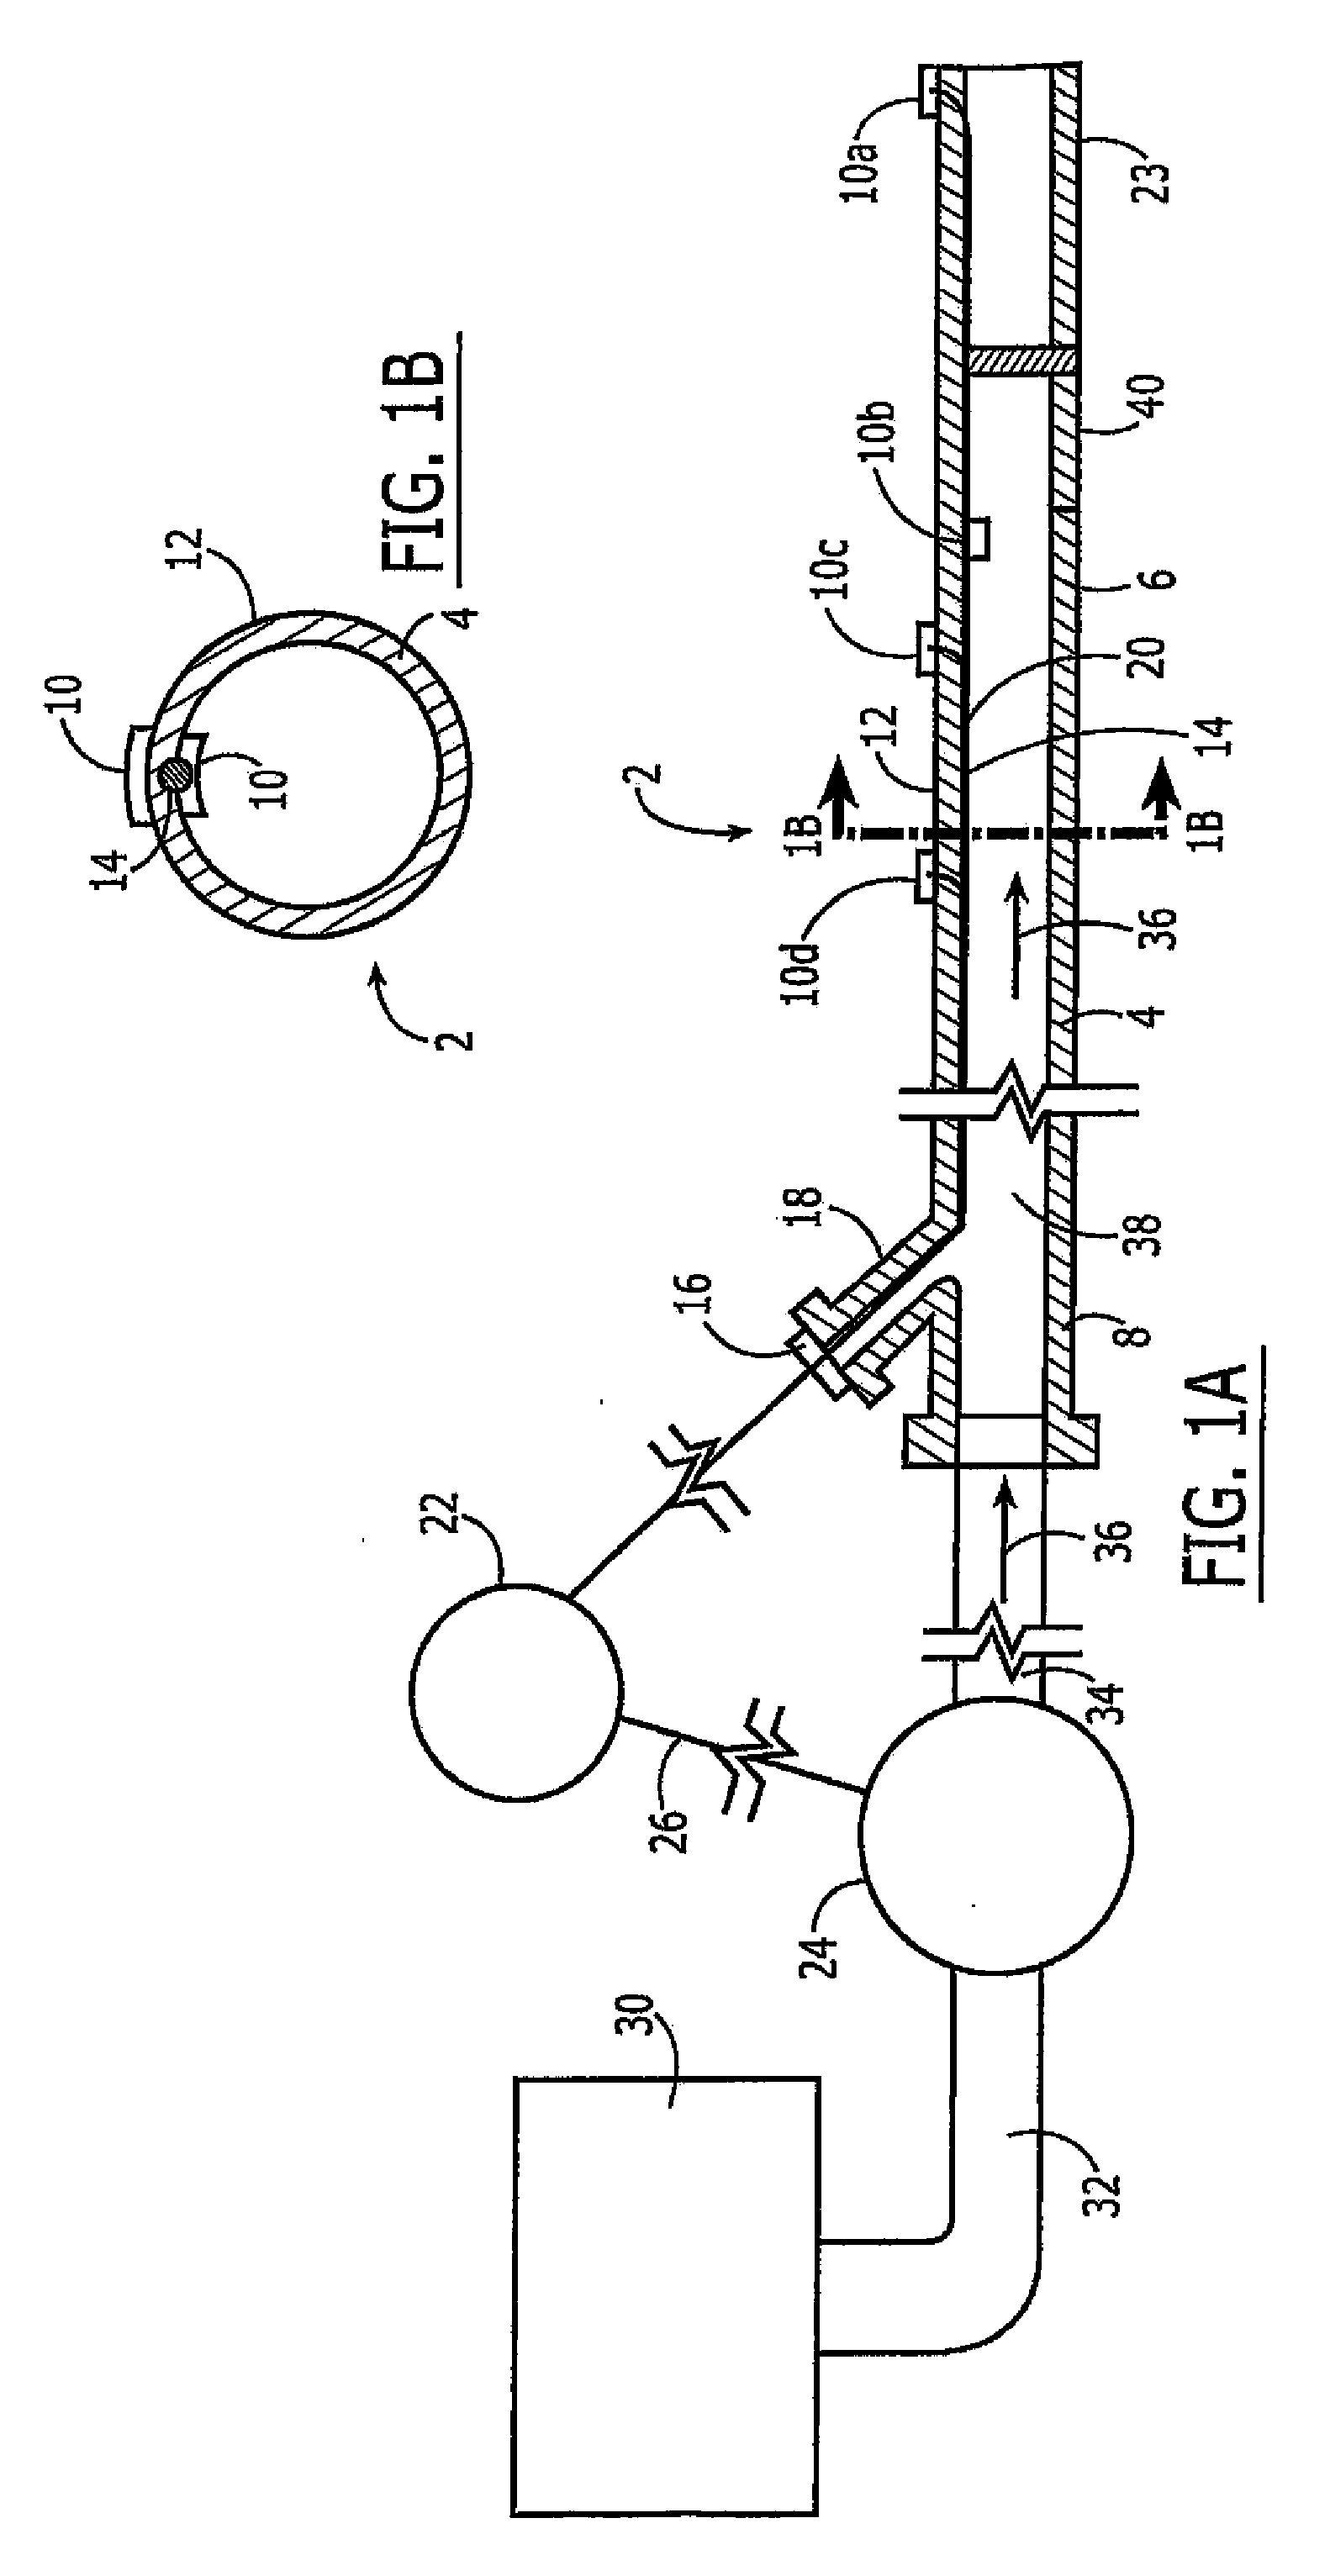 Systems and methods for intravascular cooling